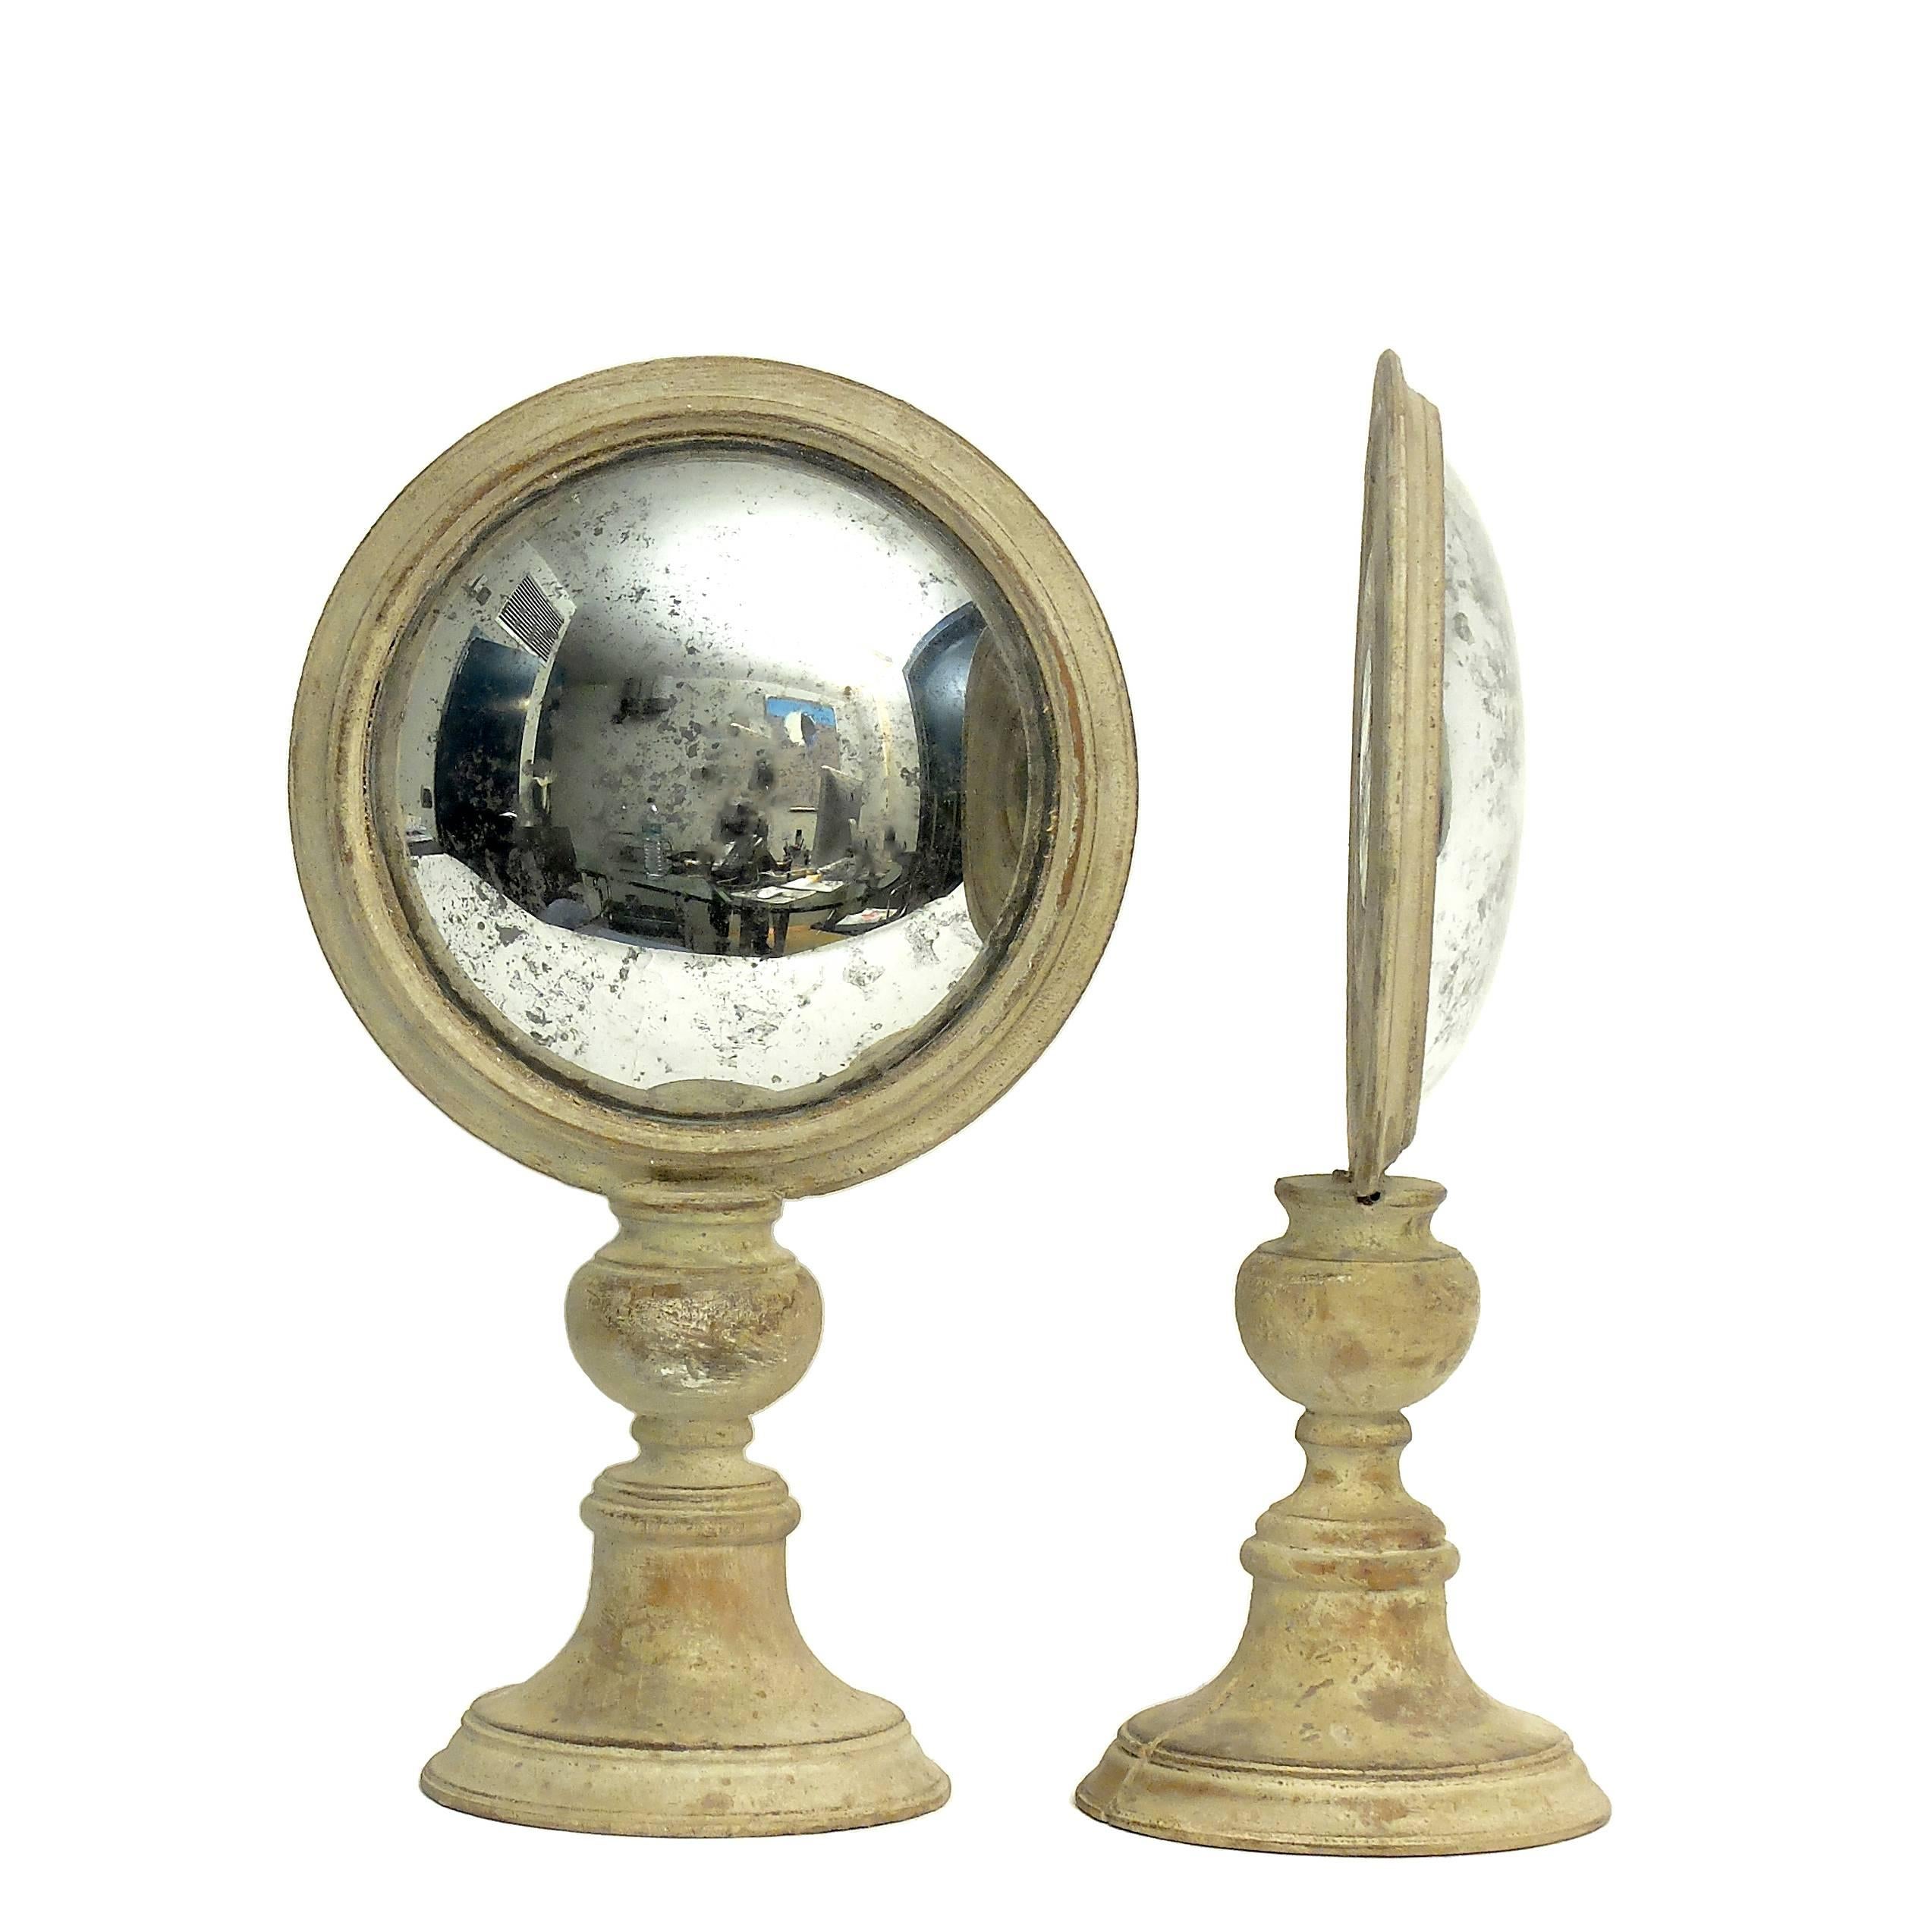 A couple of Wunderkammer round curved mirrors with white wooden frames mounted over white wooden round bases on the rear of the frame there is one round malachite stone.